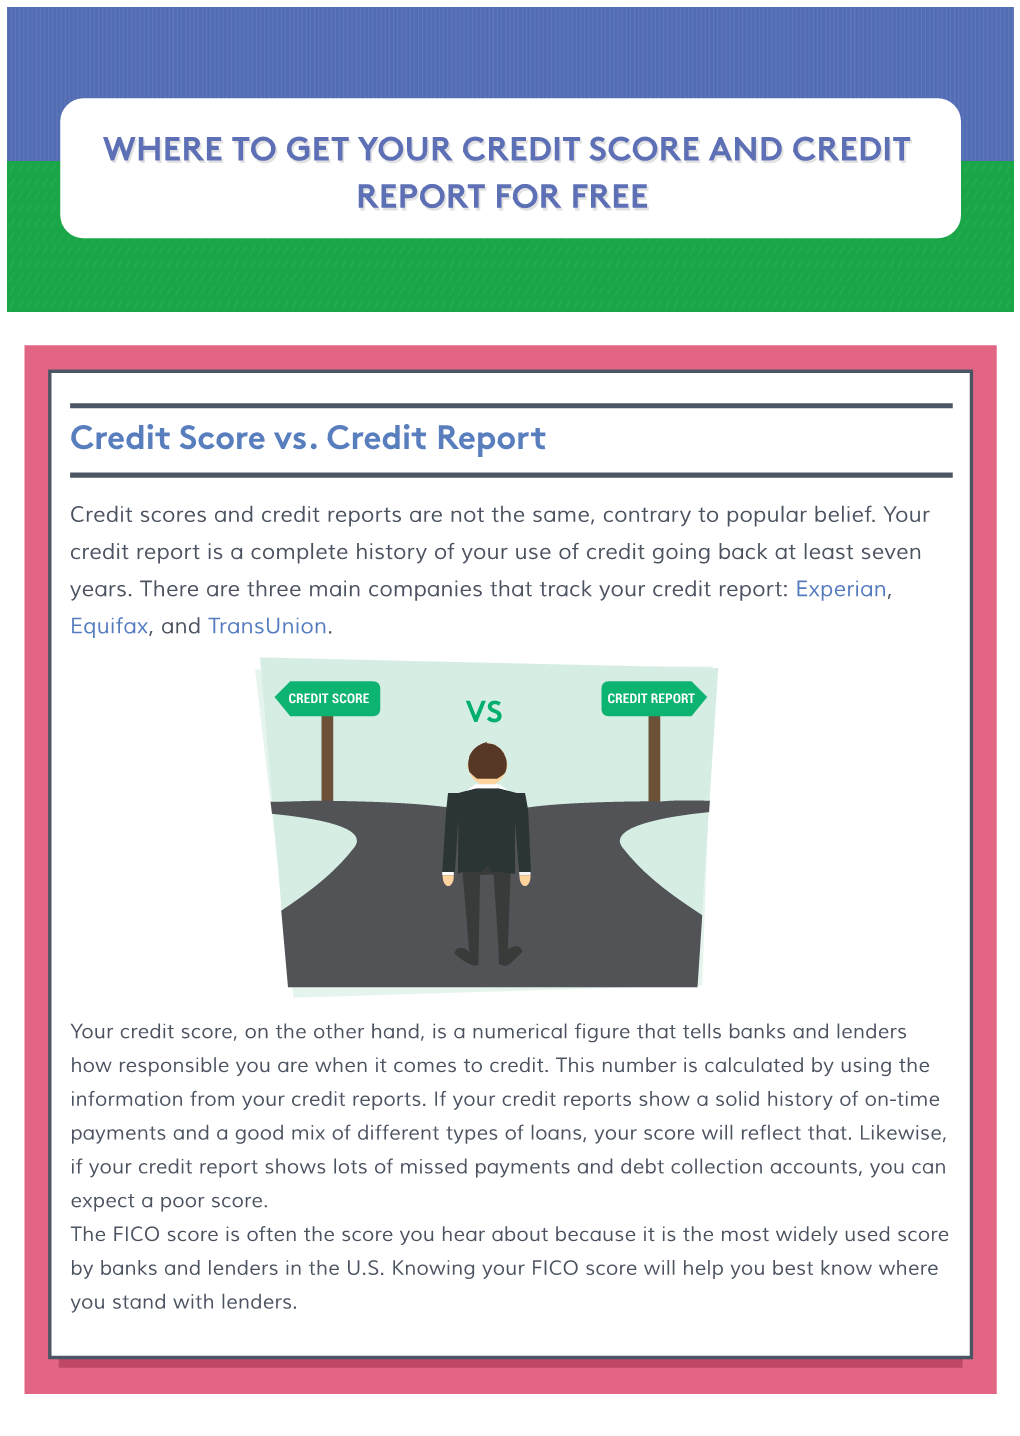 Where to Get Your Credit Score and Credit Report for Free